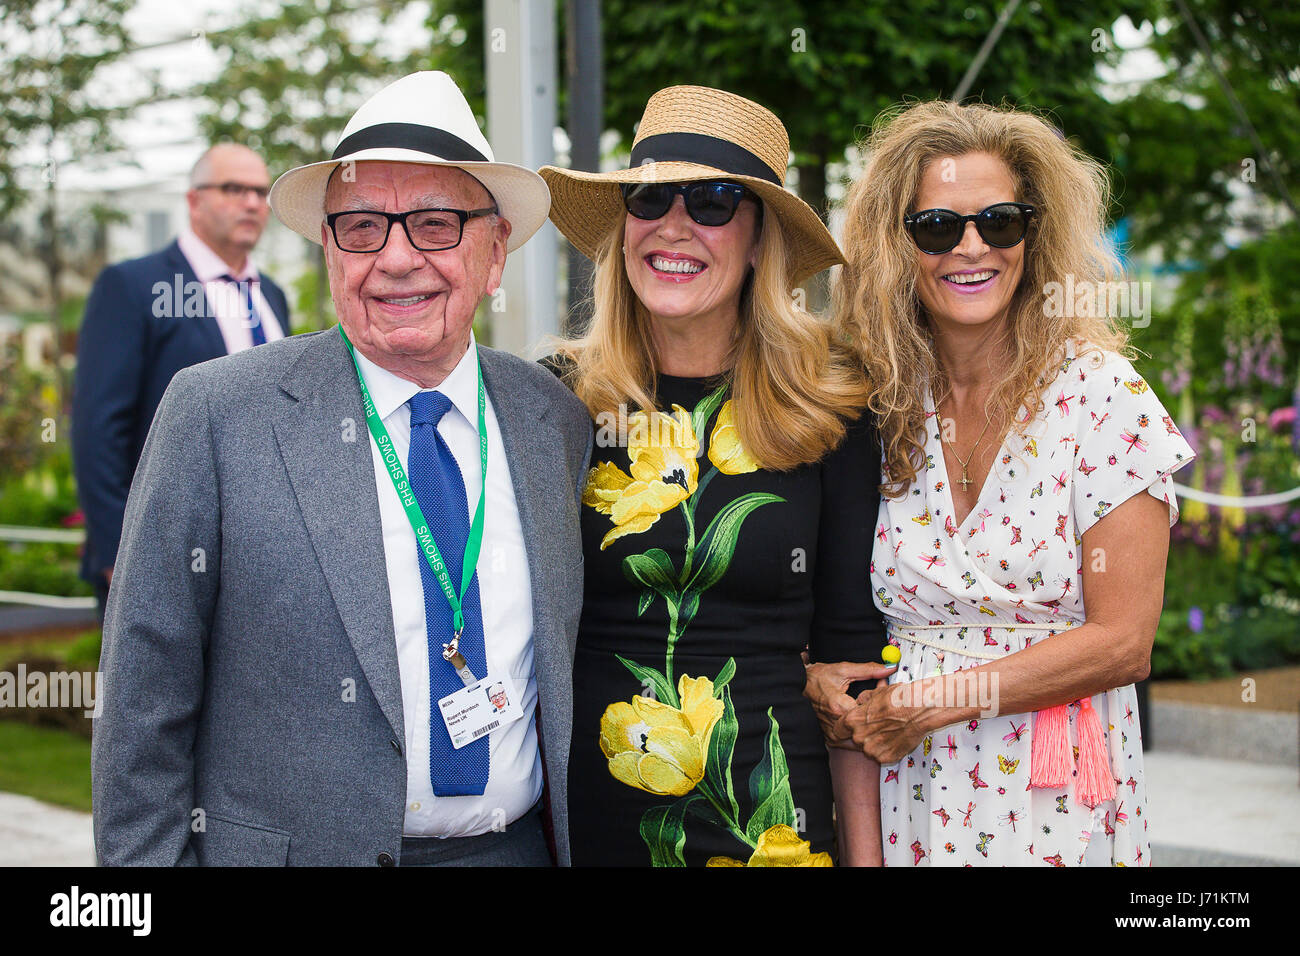 Chelsea London UK RHS Chelsea Flower Show Rupert Murdoch, Australian-born American media mogul and His Wife Jerry Murdoch together with Suzanne Wyman ife of former Rolling Stone Bill Wyman pose for photographers at Chelsea Flower Sow 2017 Credit: David Betteridge/Alamy Live News Stock Photo